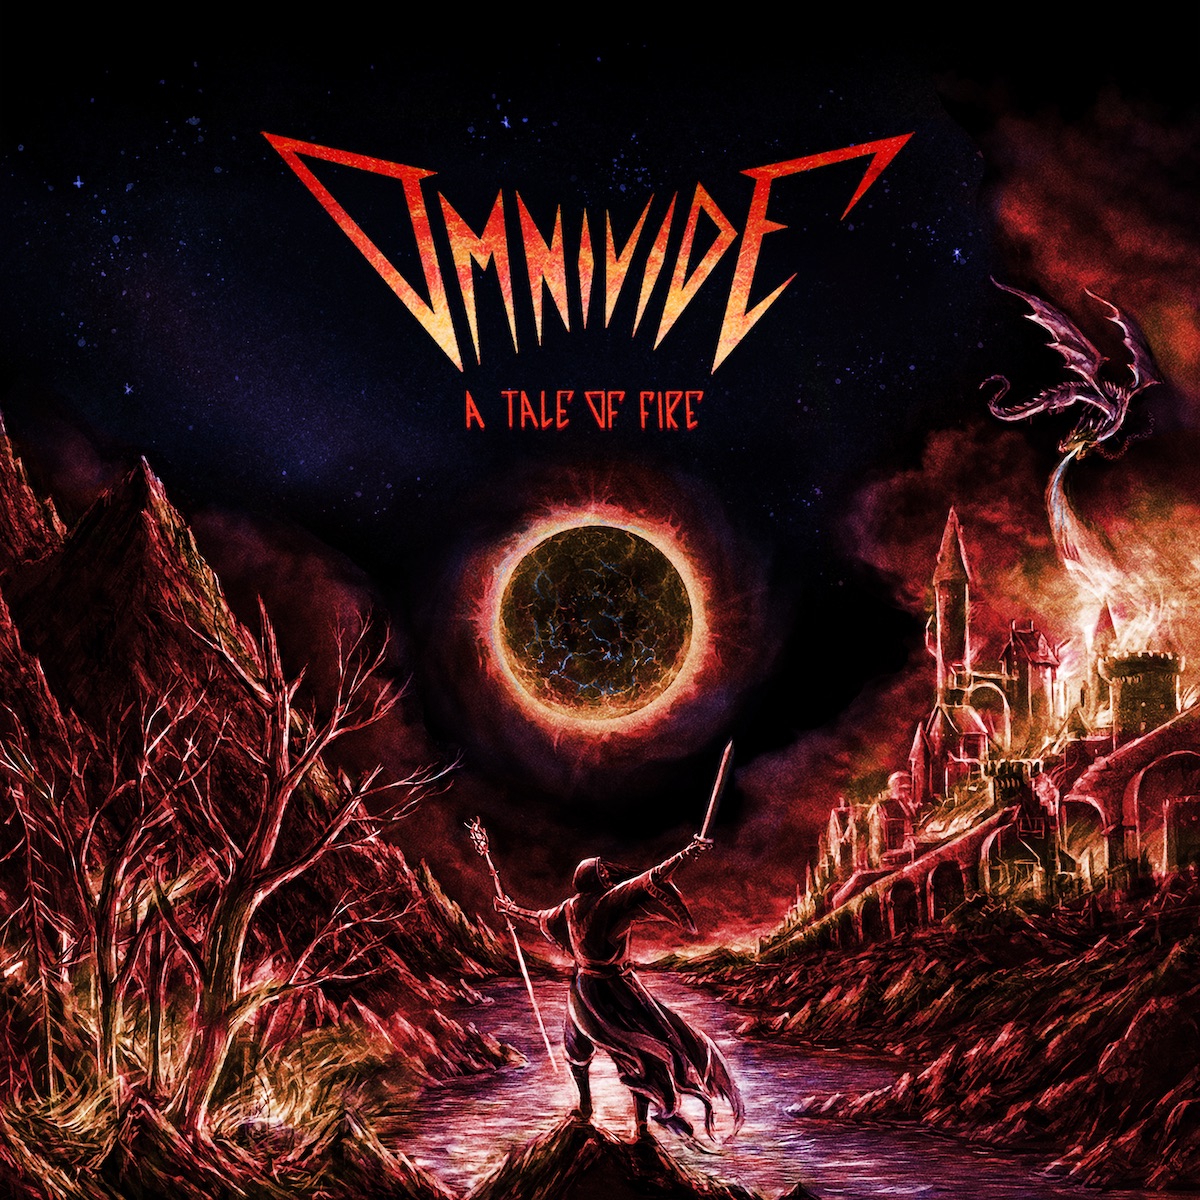 DEBUT ALBUM REVIEW: A Tale of Fire by Omnivide